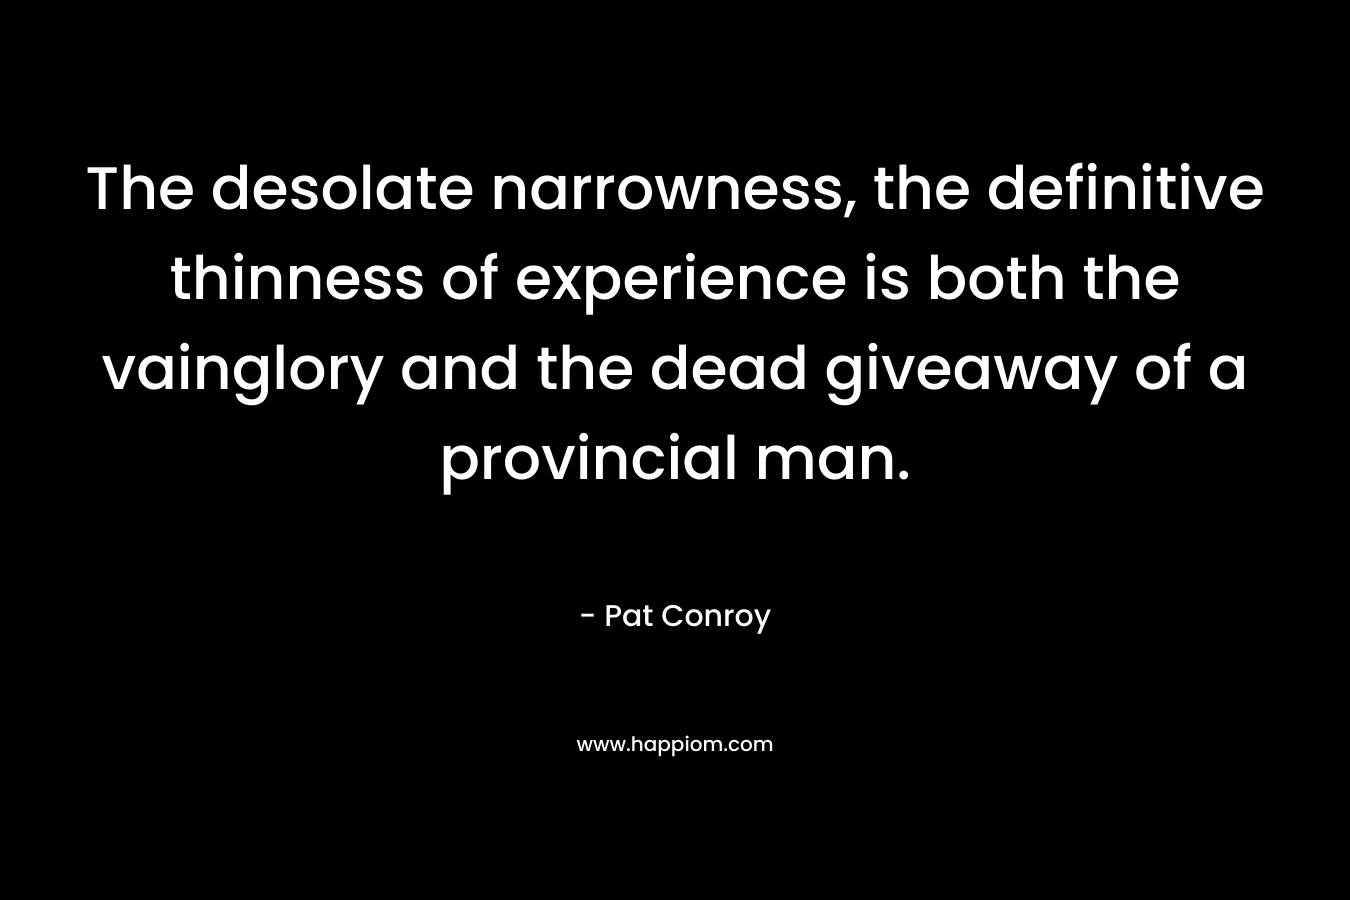 The desolate narrowness, the definitive thinness of experience is both the vainglory and the dead giveaway of a provincial man. – Pat Conroy